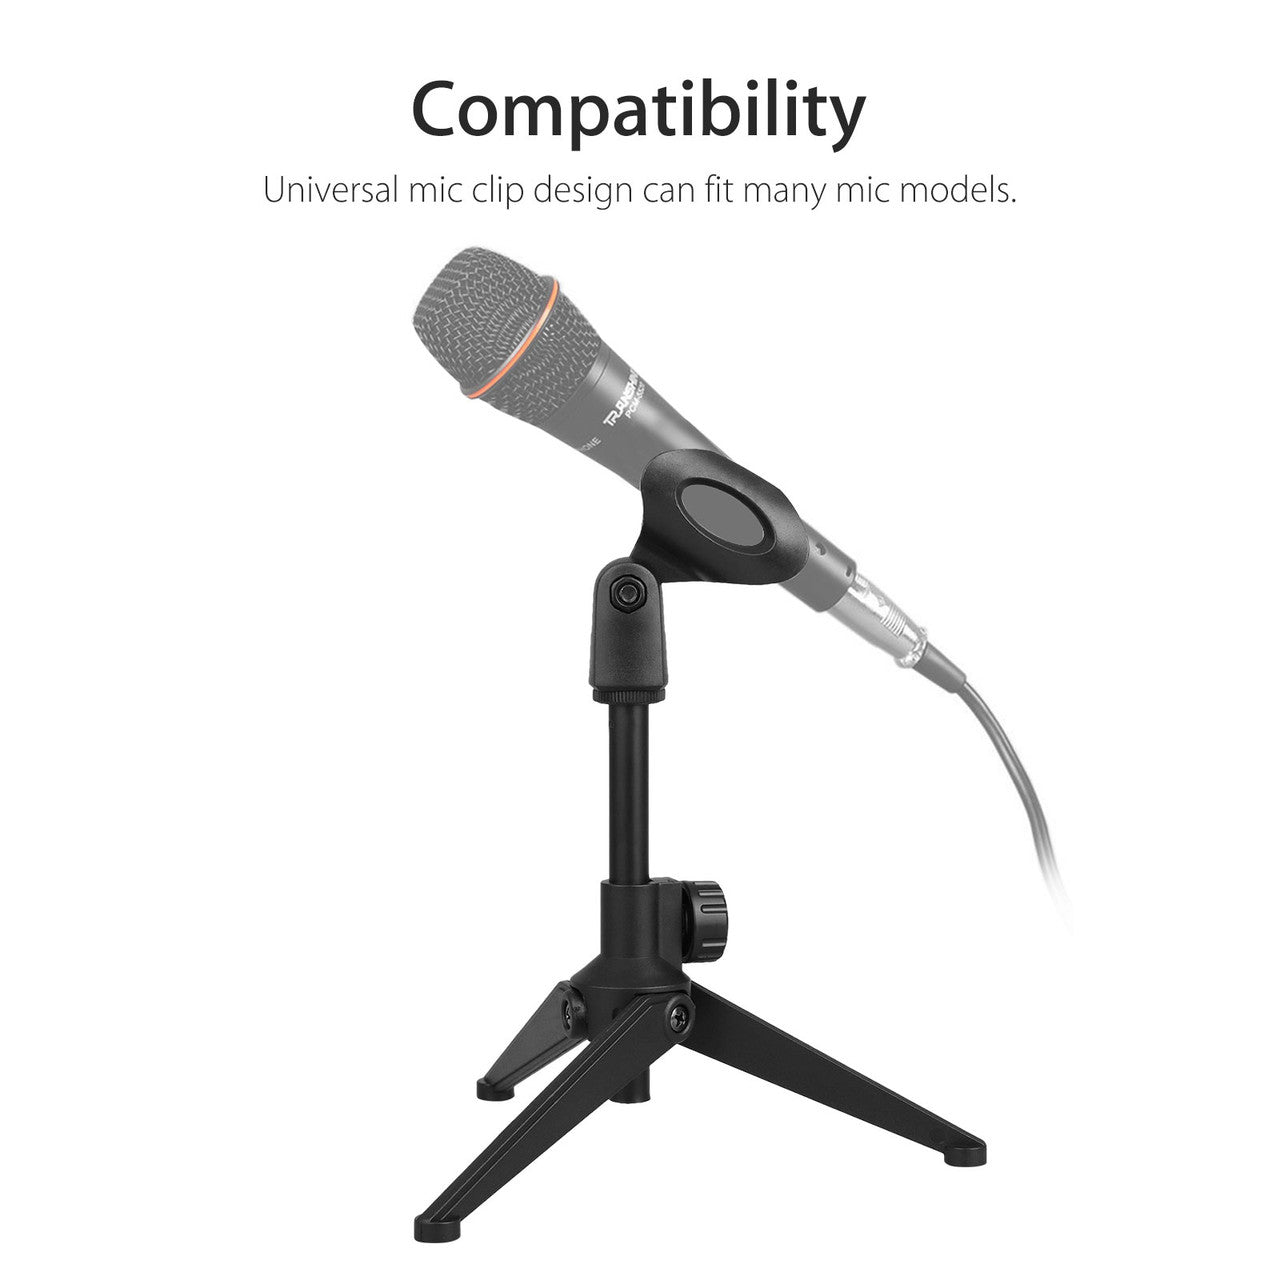 Tripod Desktop Microphone Stand Holder, Lightweight Stable Collapsible Desktop Microphone Stand,Adjustable Height 7.08 to 9.45 inches, for Lectures,meetings,Online Chat